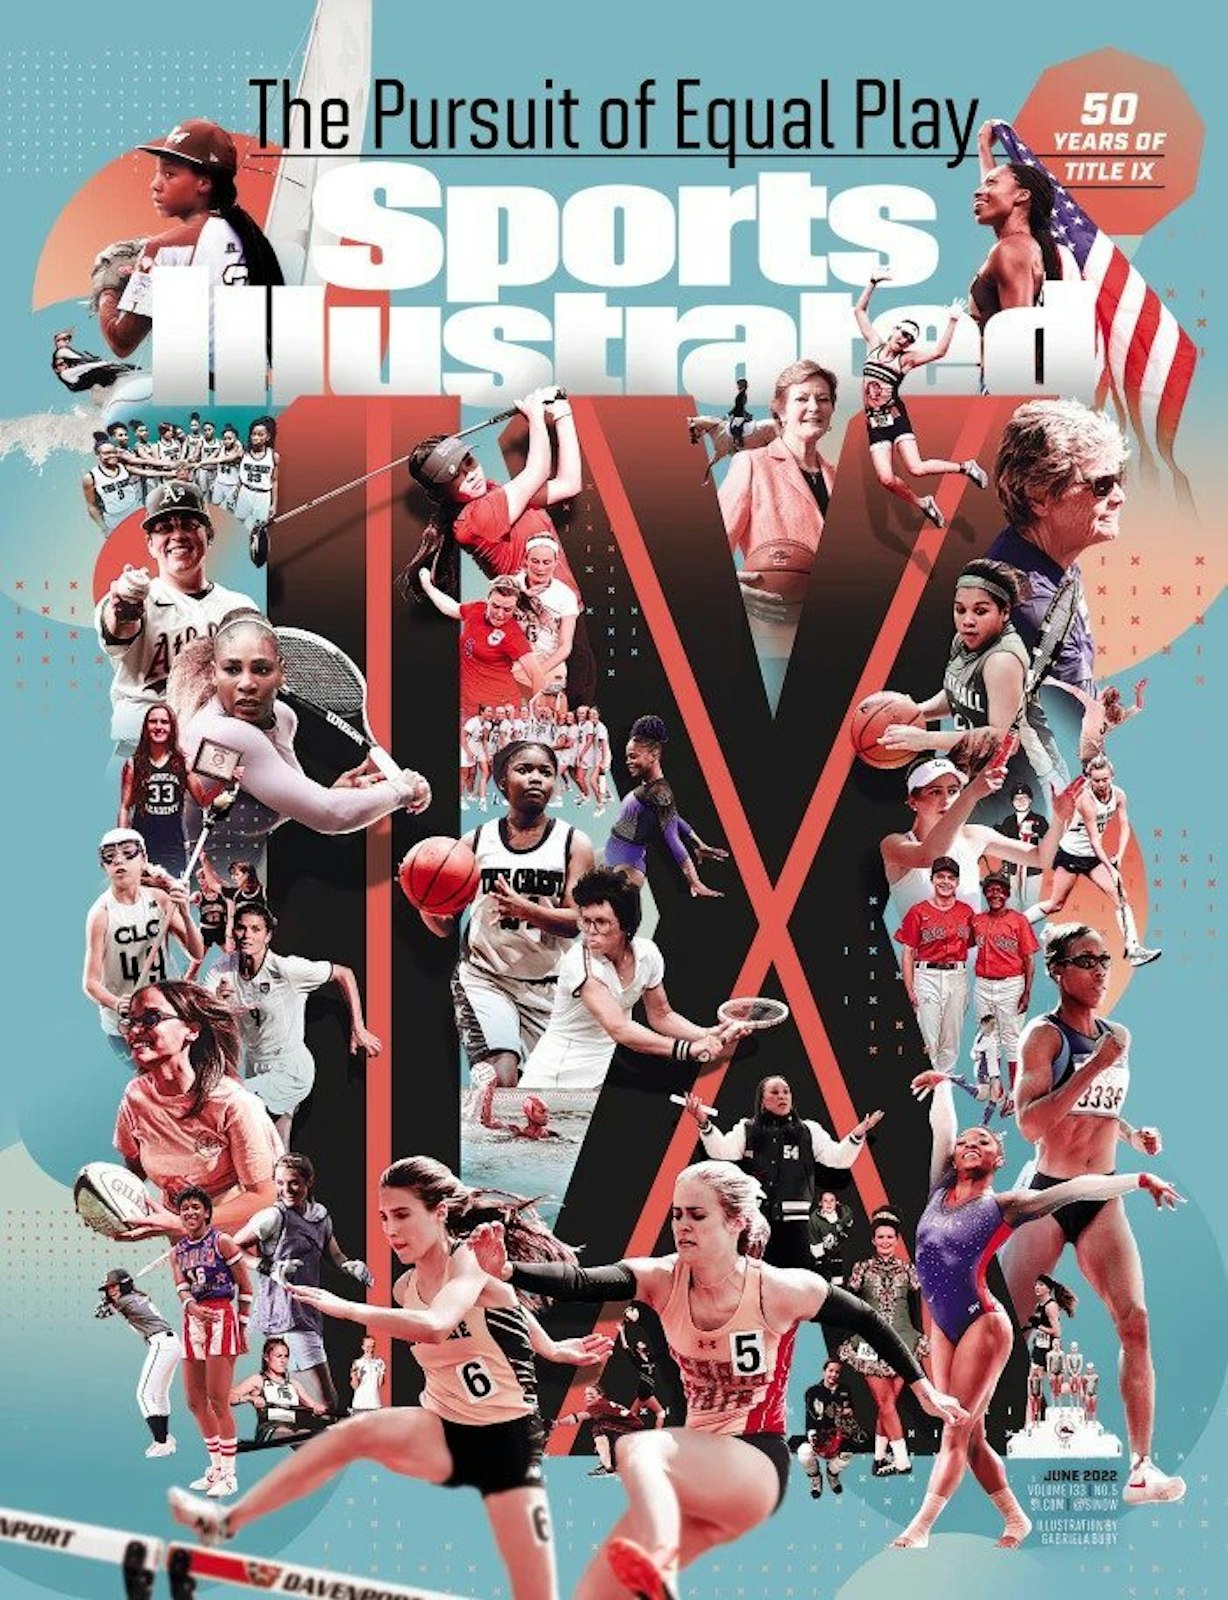 The cover of Sports Illustrated's June 2022 issue features 50 years of women's athletics, including the daughters of several Gabriel Richard alumni.